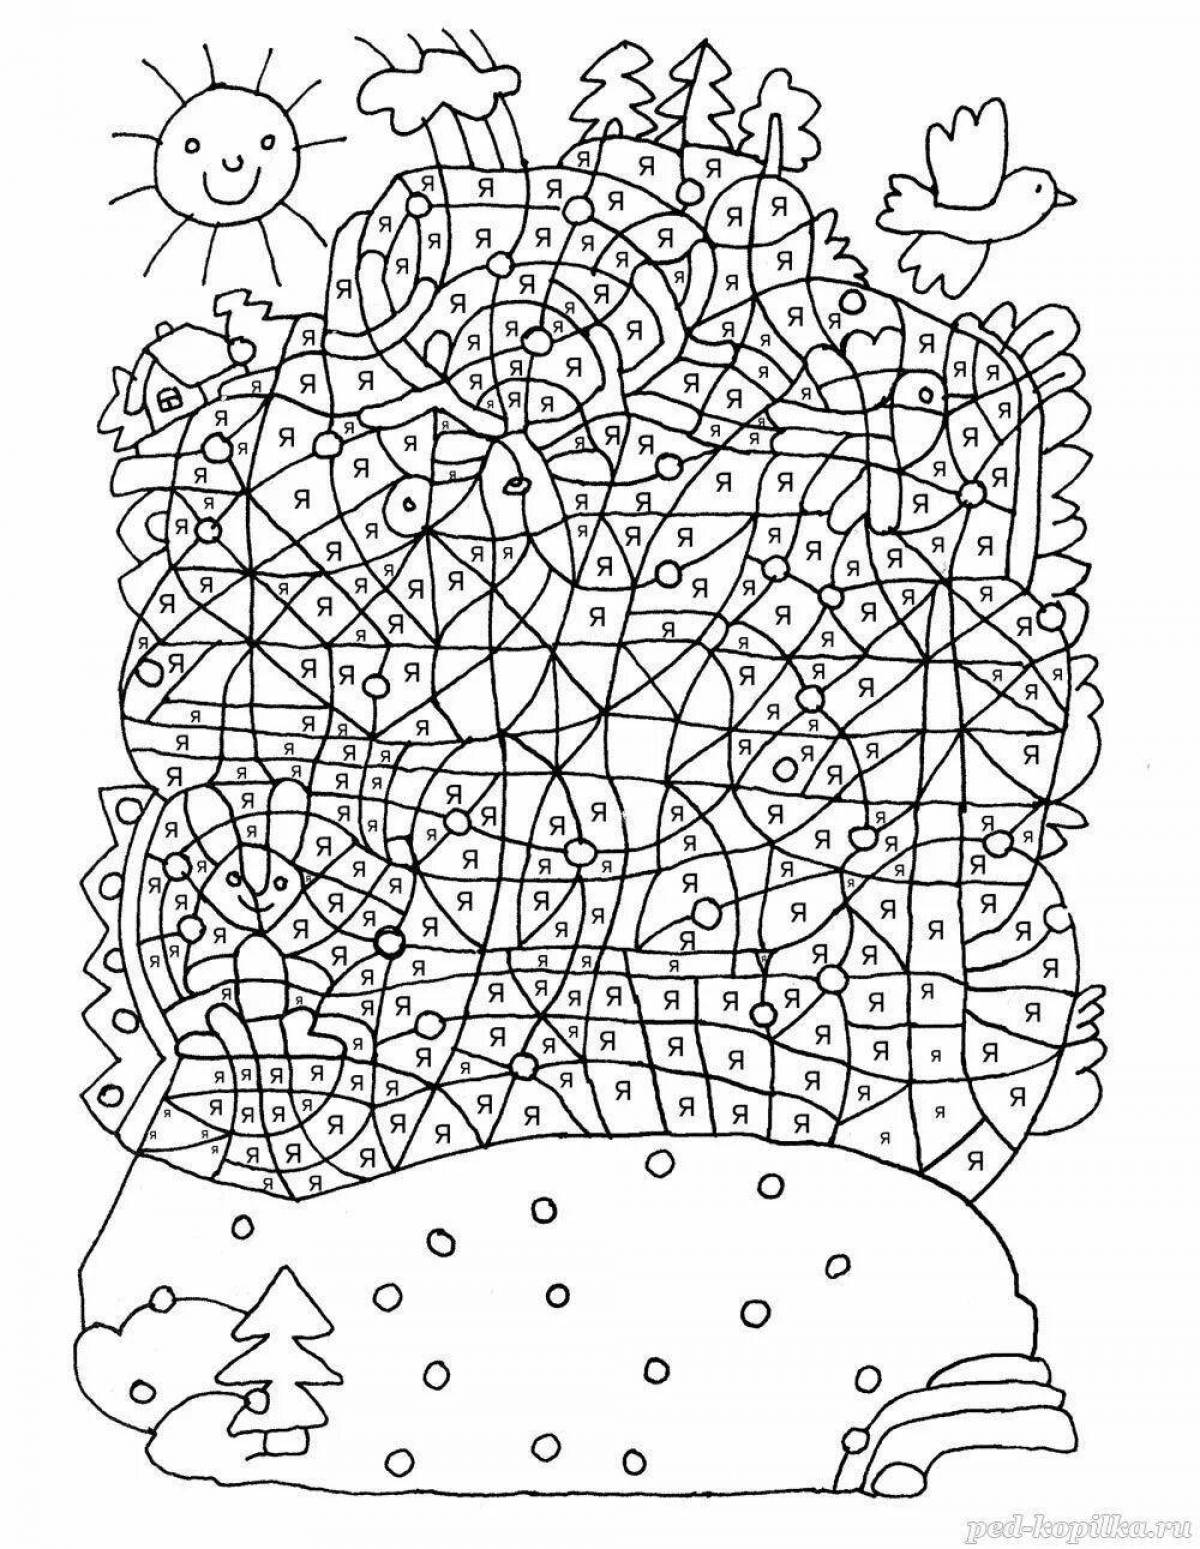 Coloring-imagination coloring page intellectual